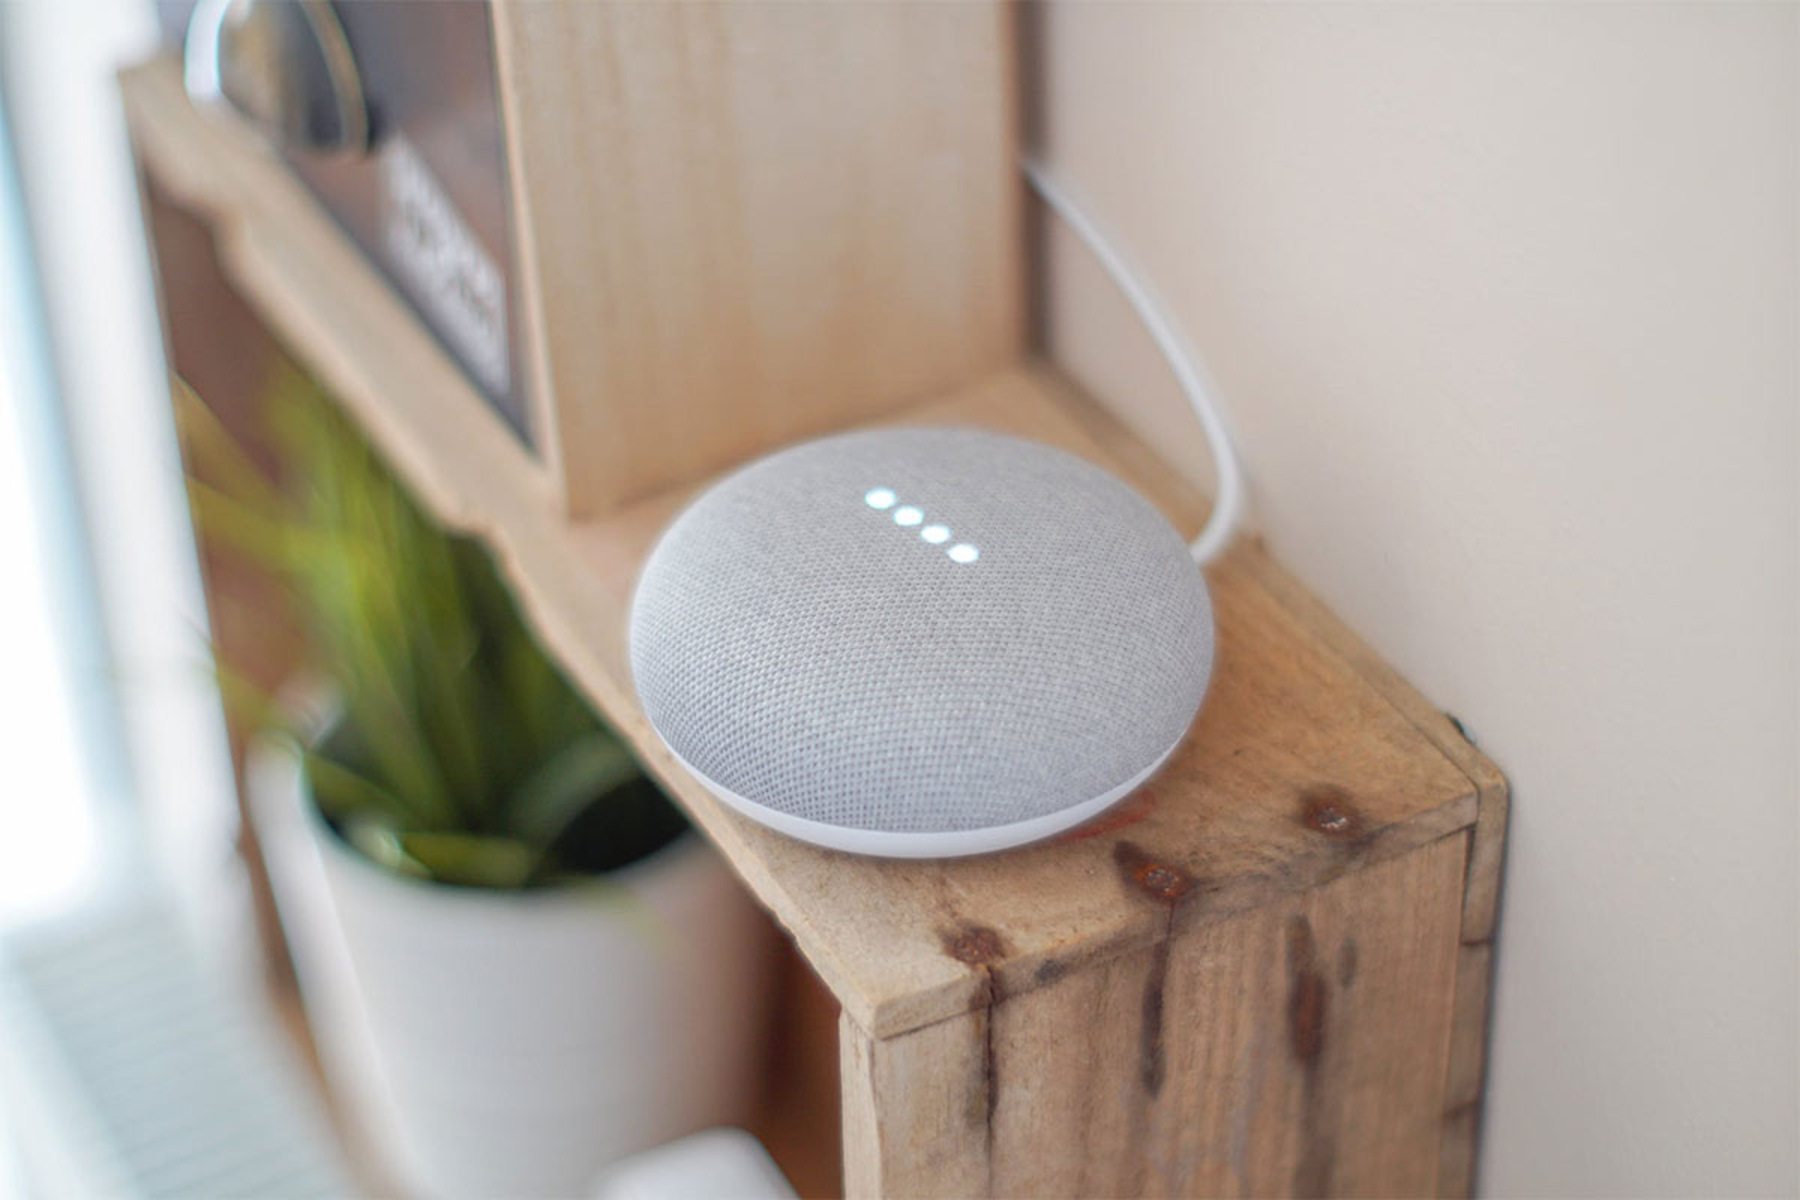 How To Connect Google Smart Speaker To Wi-Fi